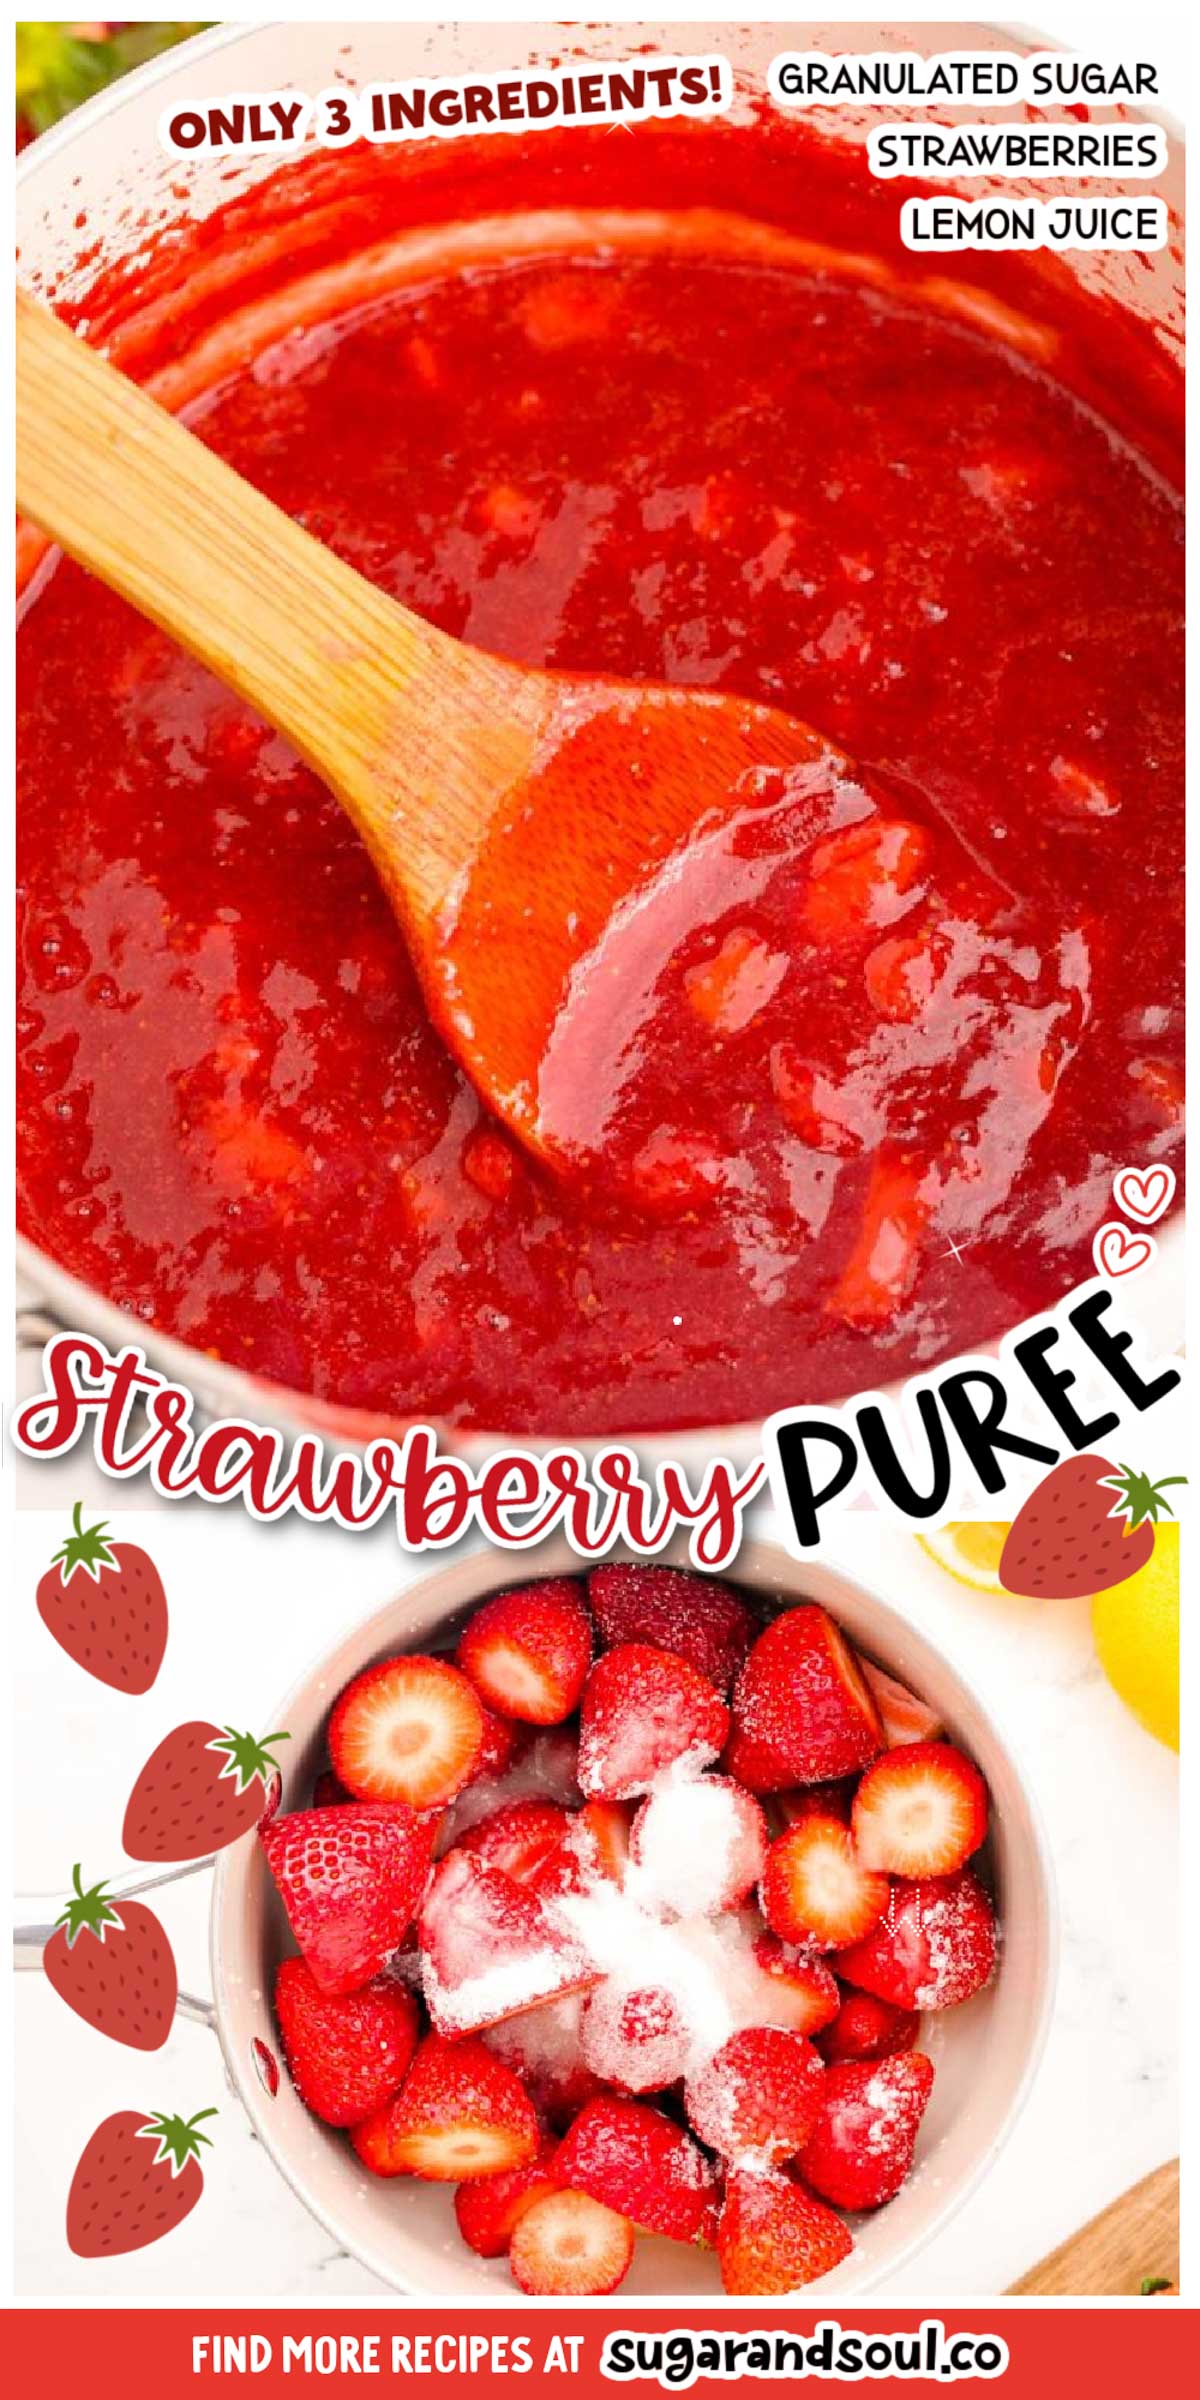 How To Make Strawberry Puree is an easy recipe that can be used for anything from dessert or breakfast toppings to mixing into cocktails! Takes just 5 minutes to prep! via @sugarandsoulco